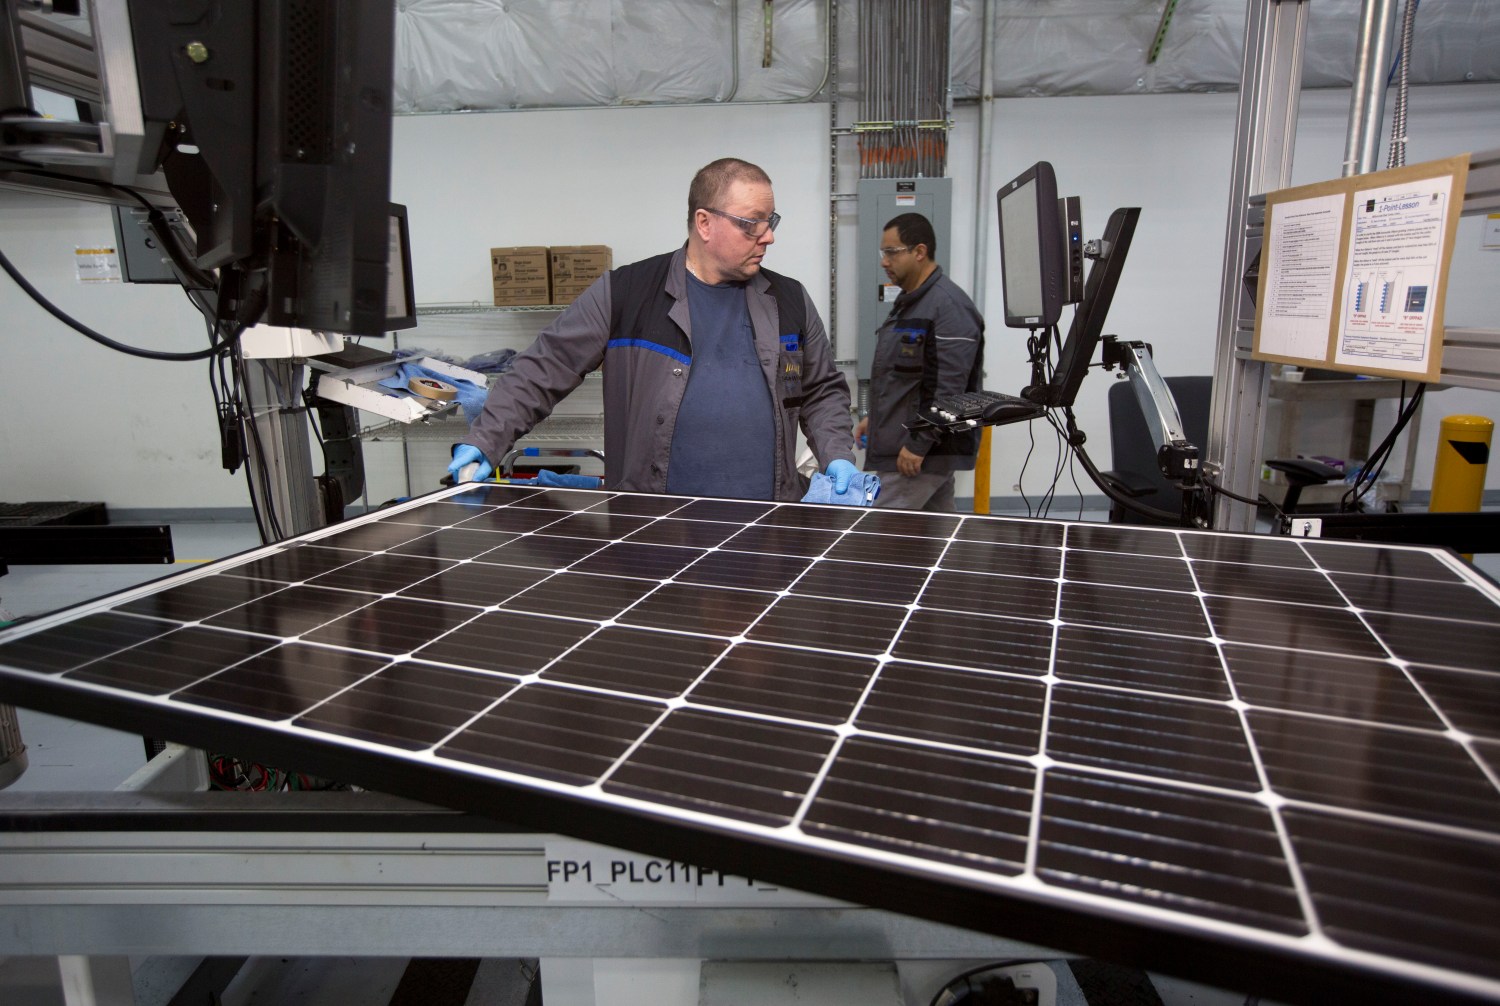 Production operator John White checks a panel at the SolarWorld solar panel factory in Hillsboro, Oregon, U.S., January 15, 2018. Picture taken January 15, 2018. REUTERS/Natalie Behring - RC1A2904F740